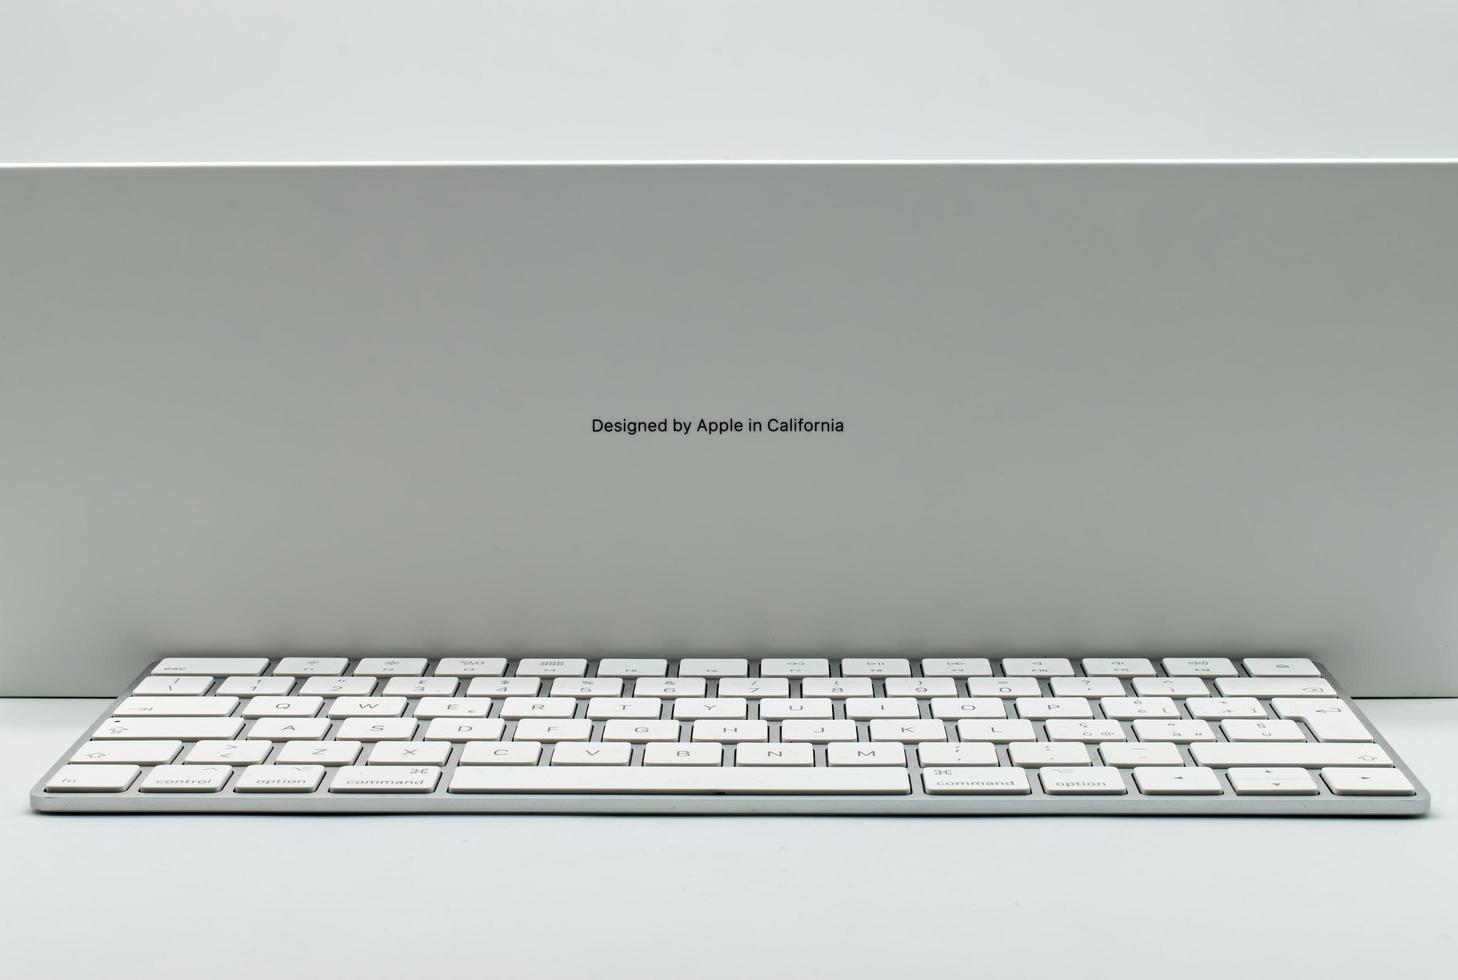 Bologna, Italy, 2021 - New iMac 21,5 inch keyboard personal computer made by Apple Computers, isolated on white background. Side view photo